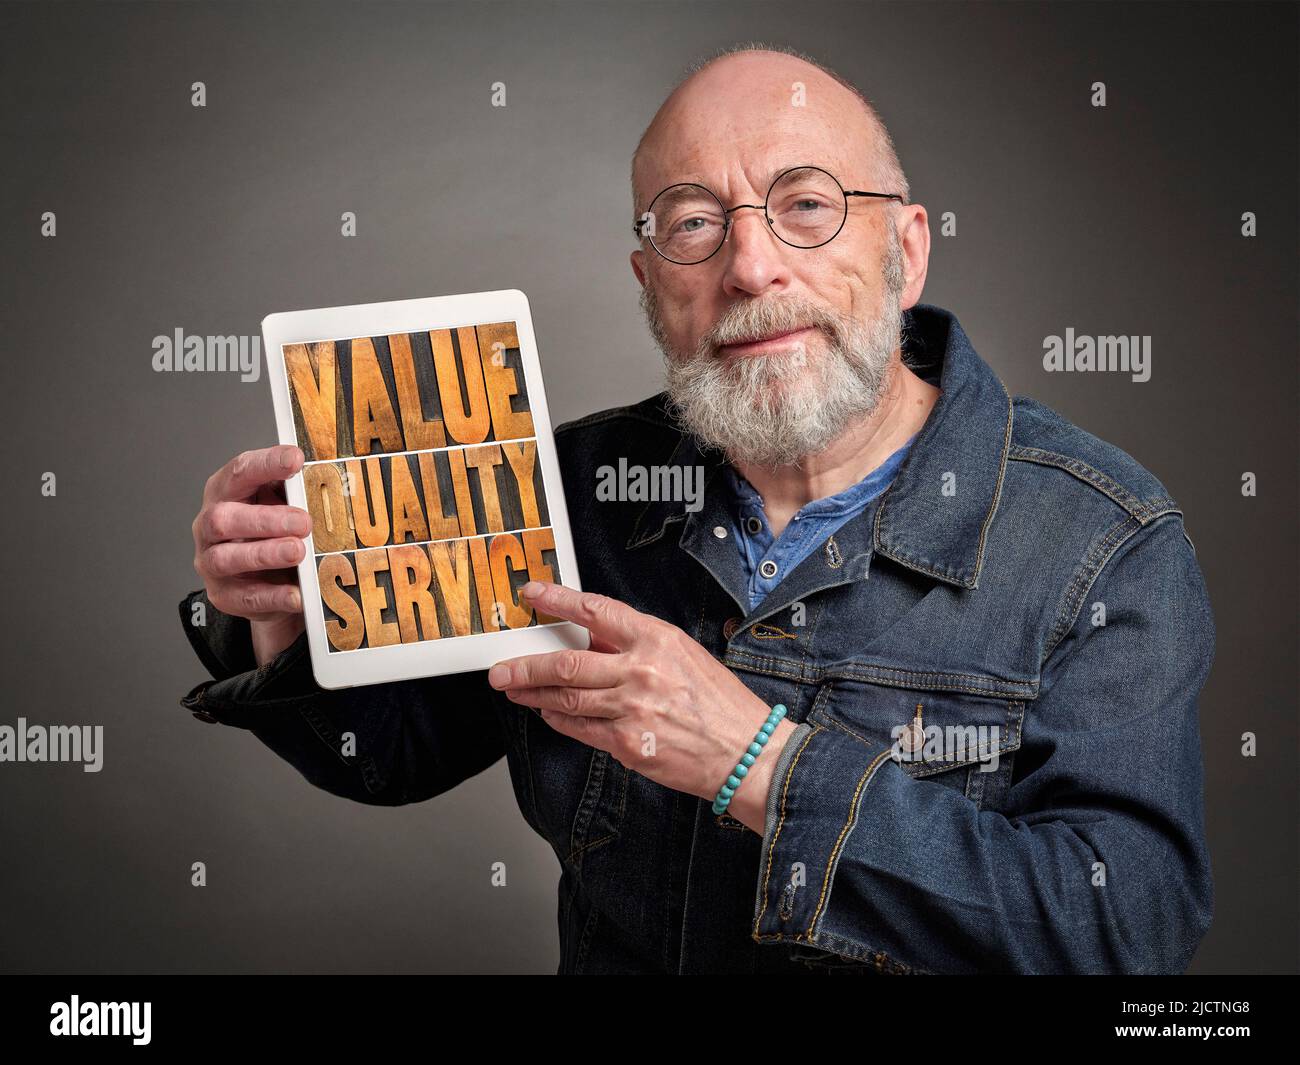 value, quality and service - older businessman sharing message or mission statement on a digital table, company core values concept Stock Photo